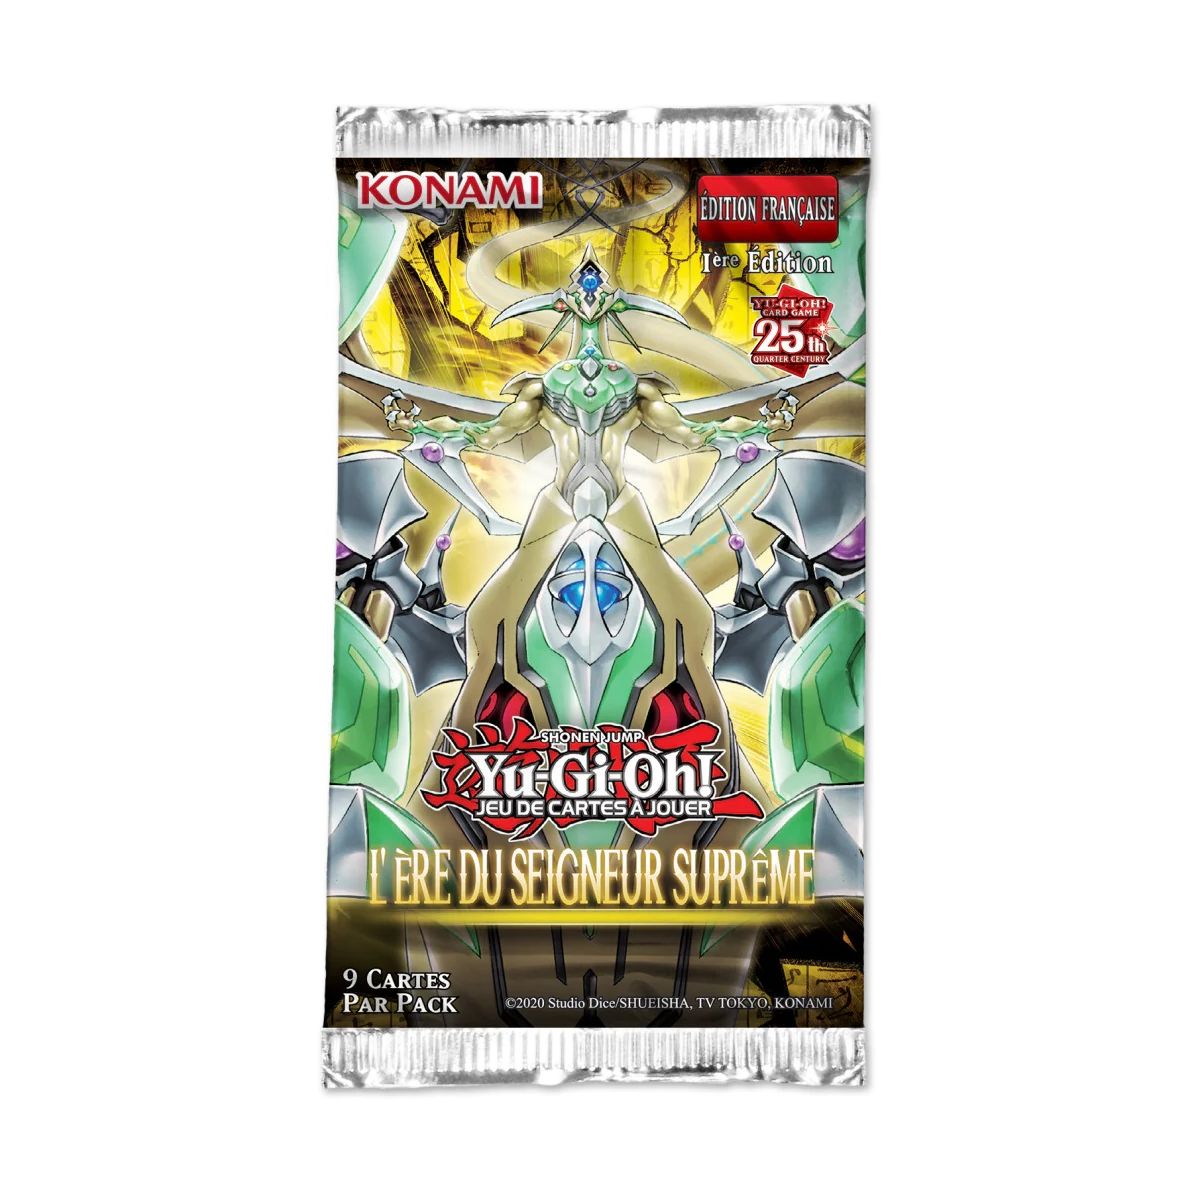 Item Yu Gi Oh! - Booster - Era of the Supreme Lord - FR